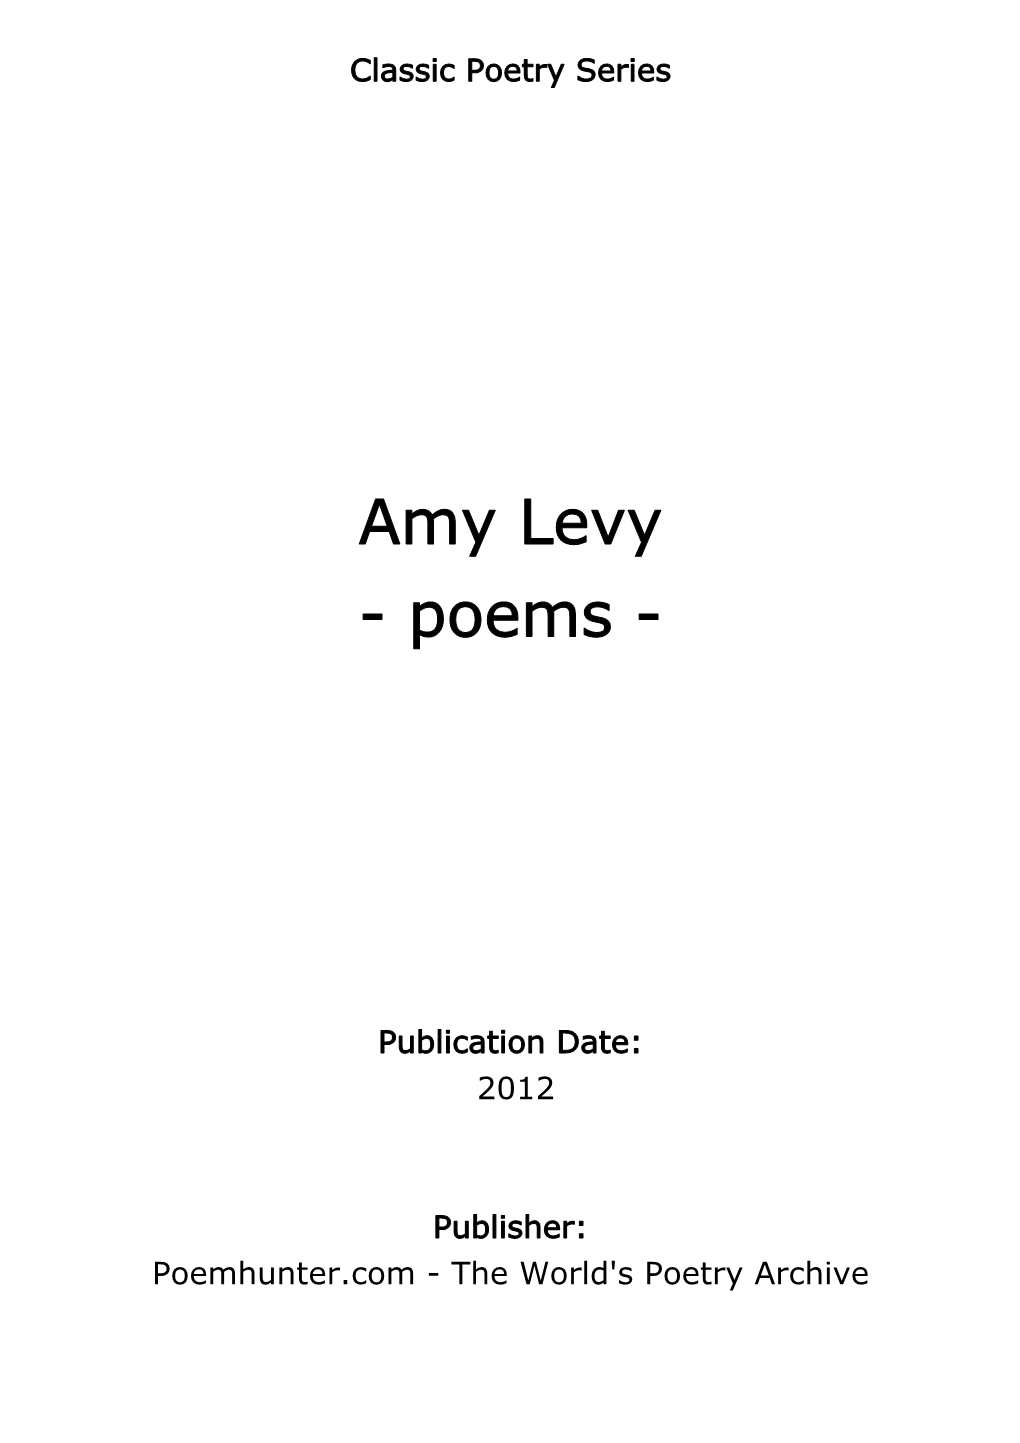 Amy Levy - Poems